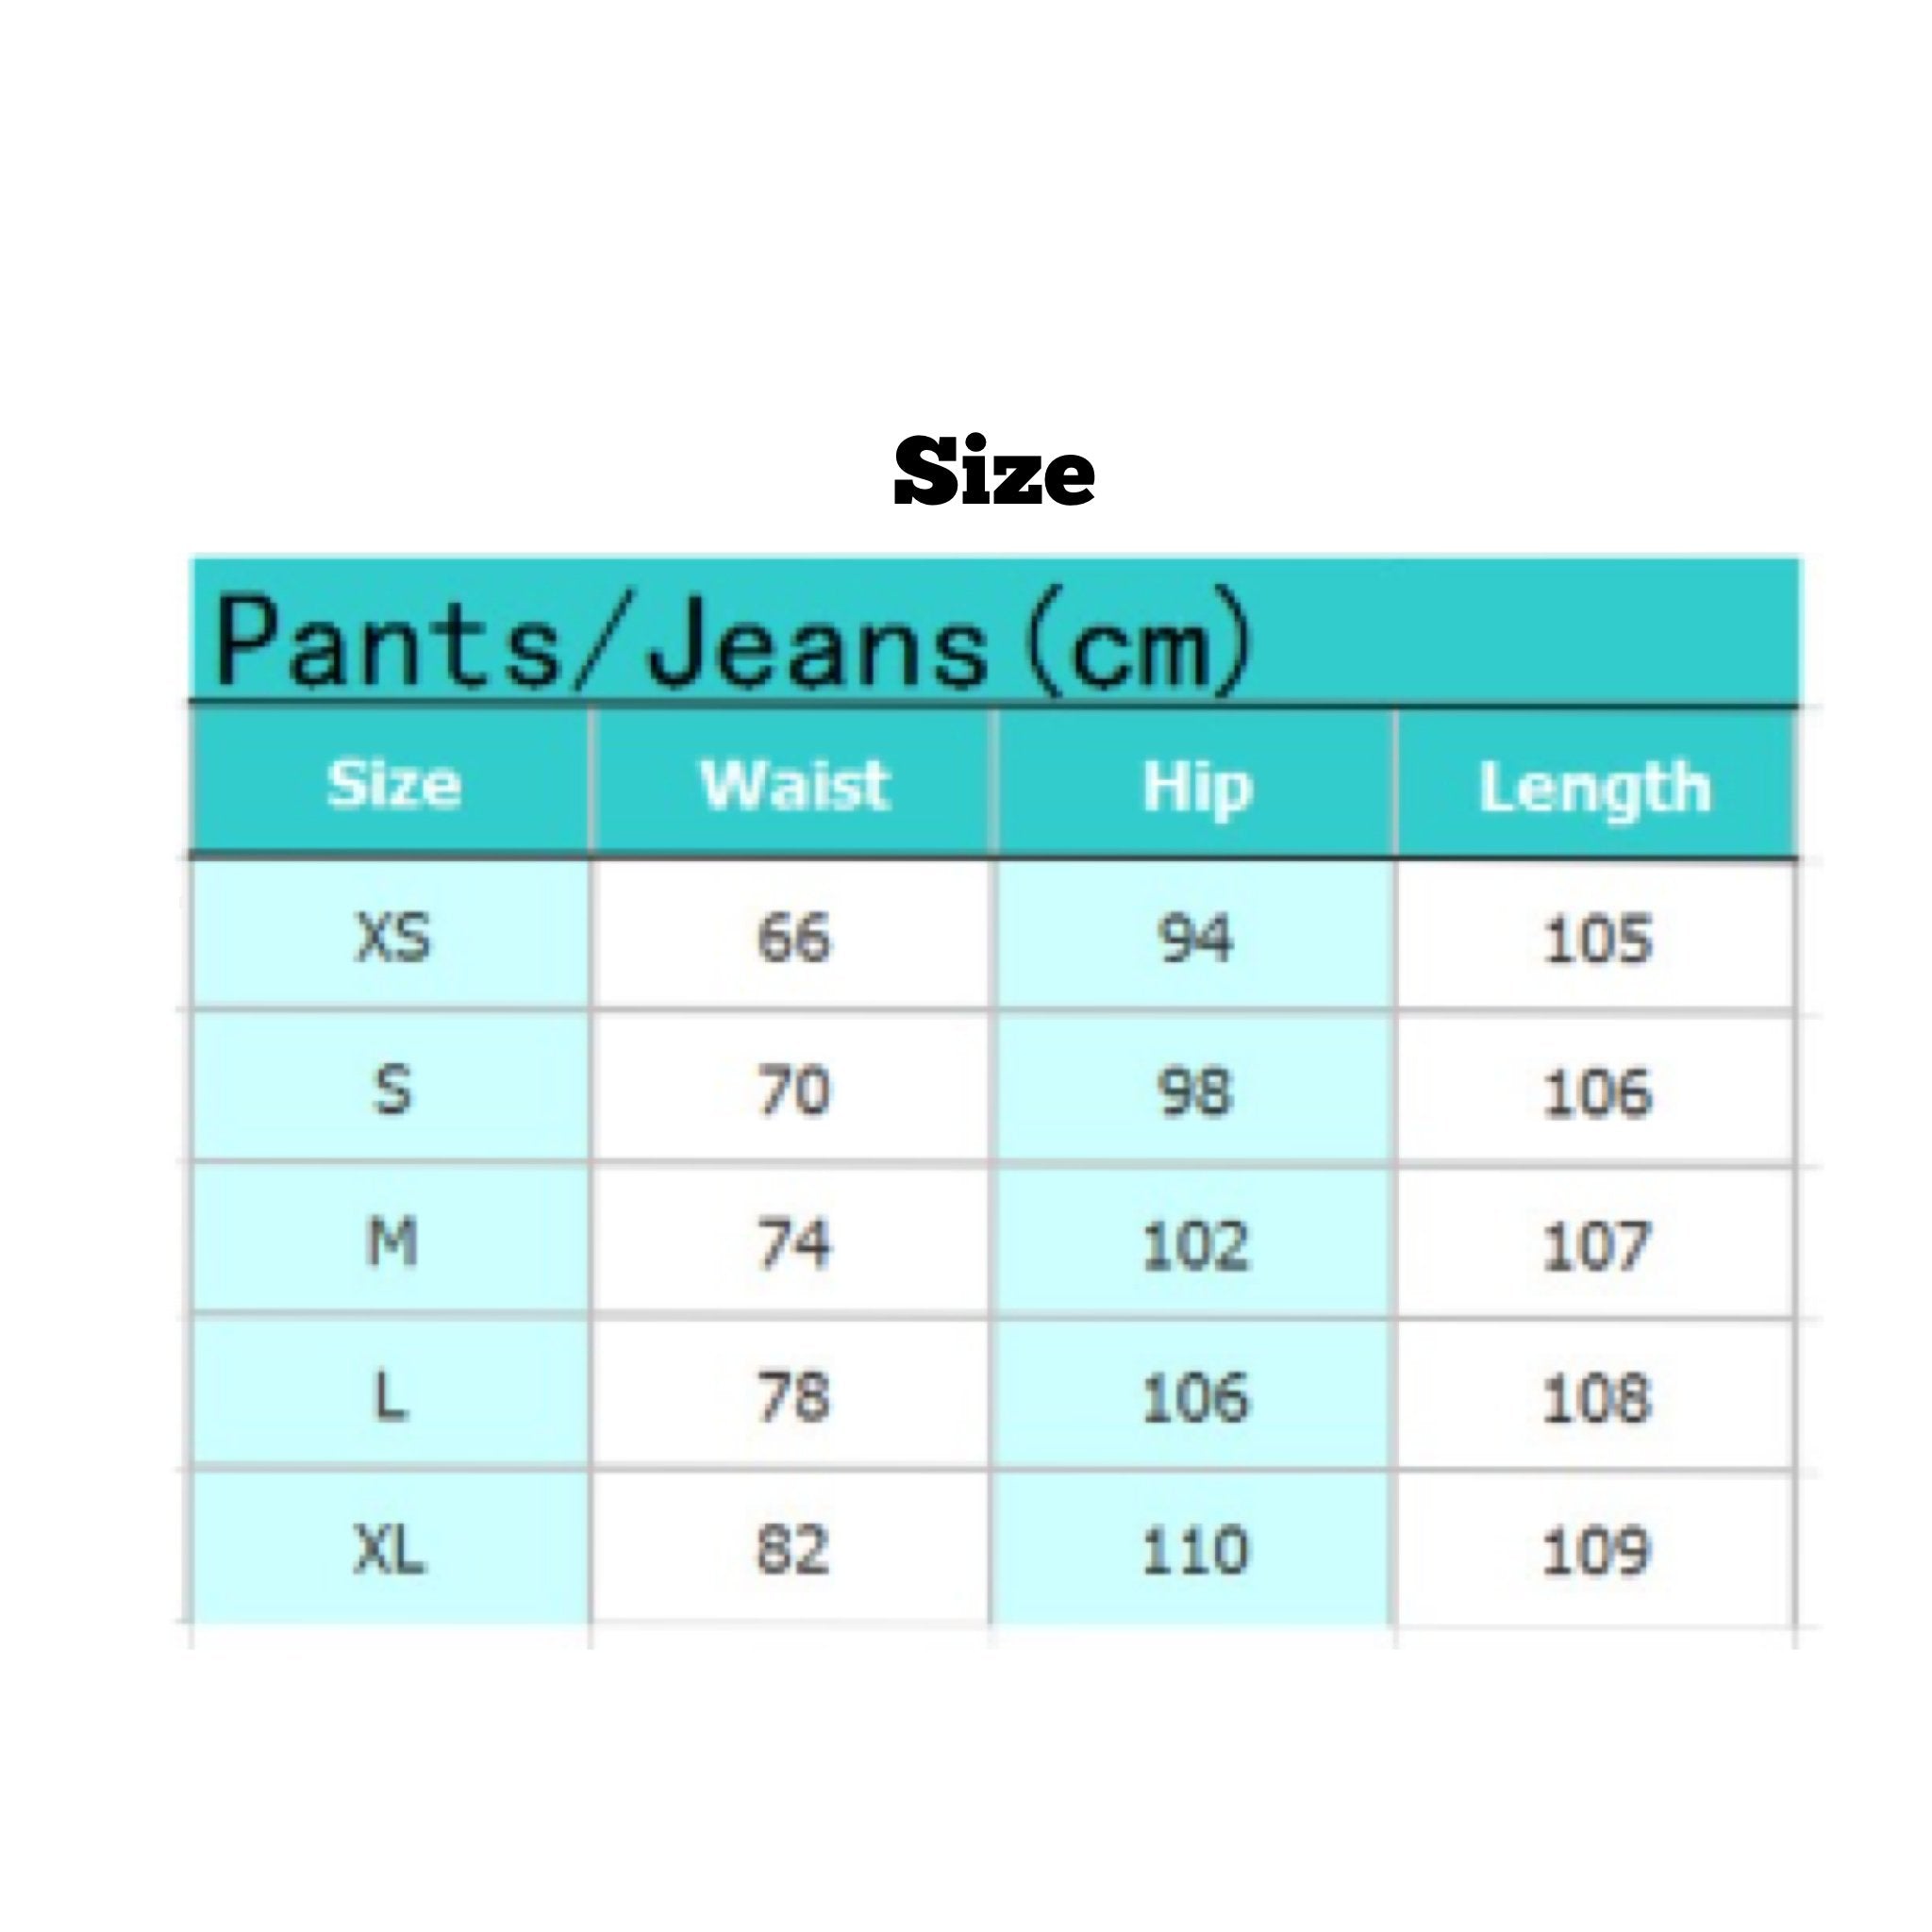 85469A - Jean’s for Women - Sarman Fashion - Wholesale Clothing Fashion Brand for Men from Canada